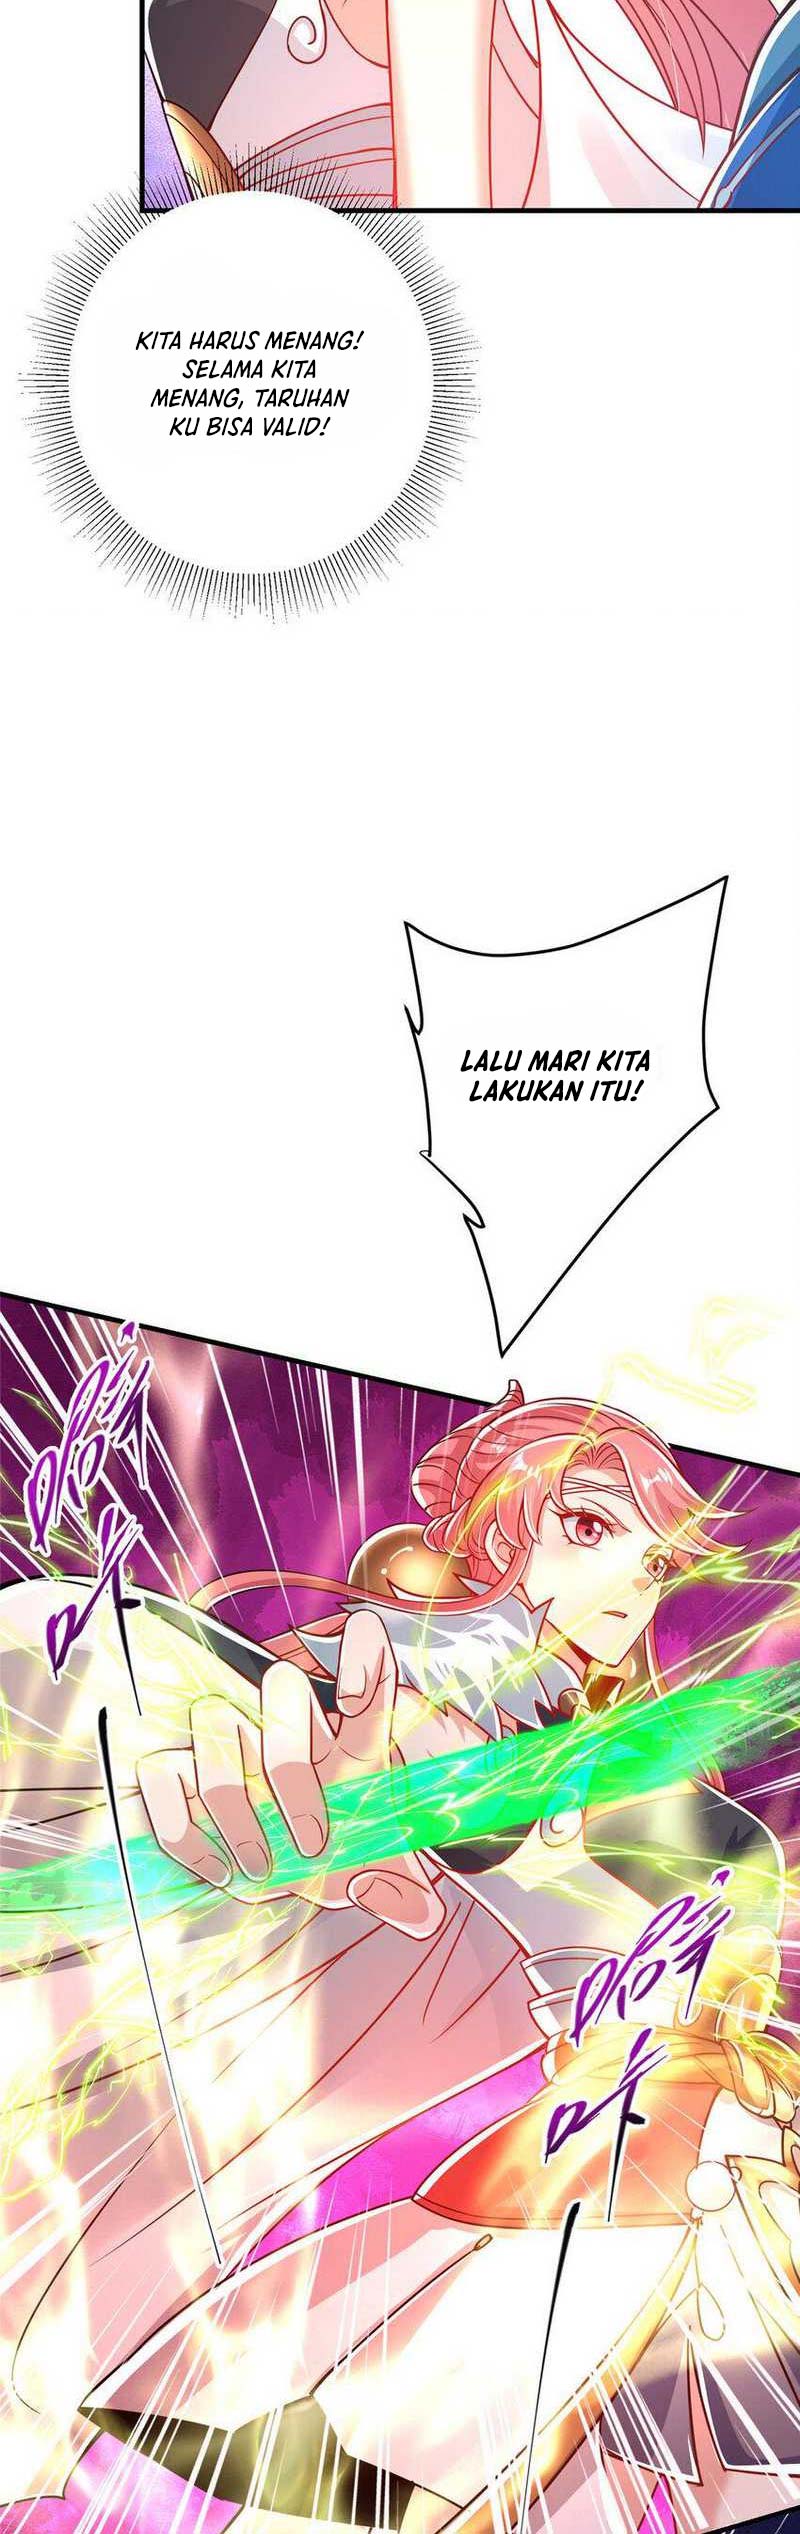 Keep A Low Profile, Sect Leader Chapter 186 Bahasa Indonesia